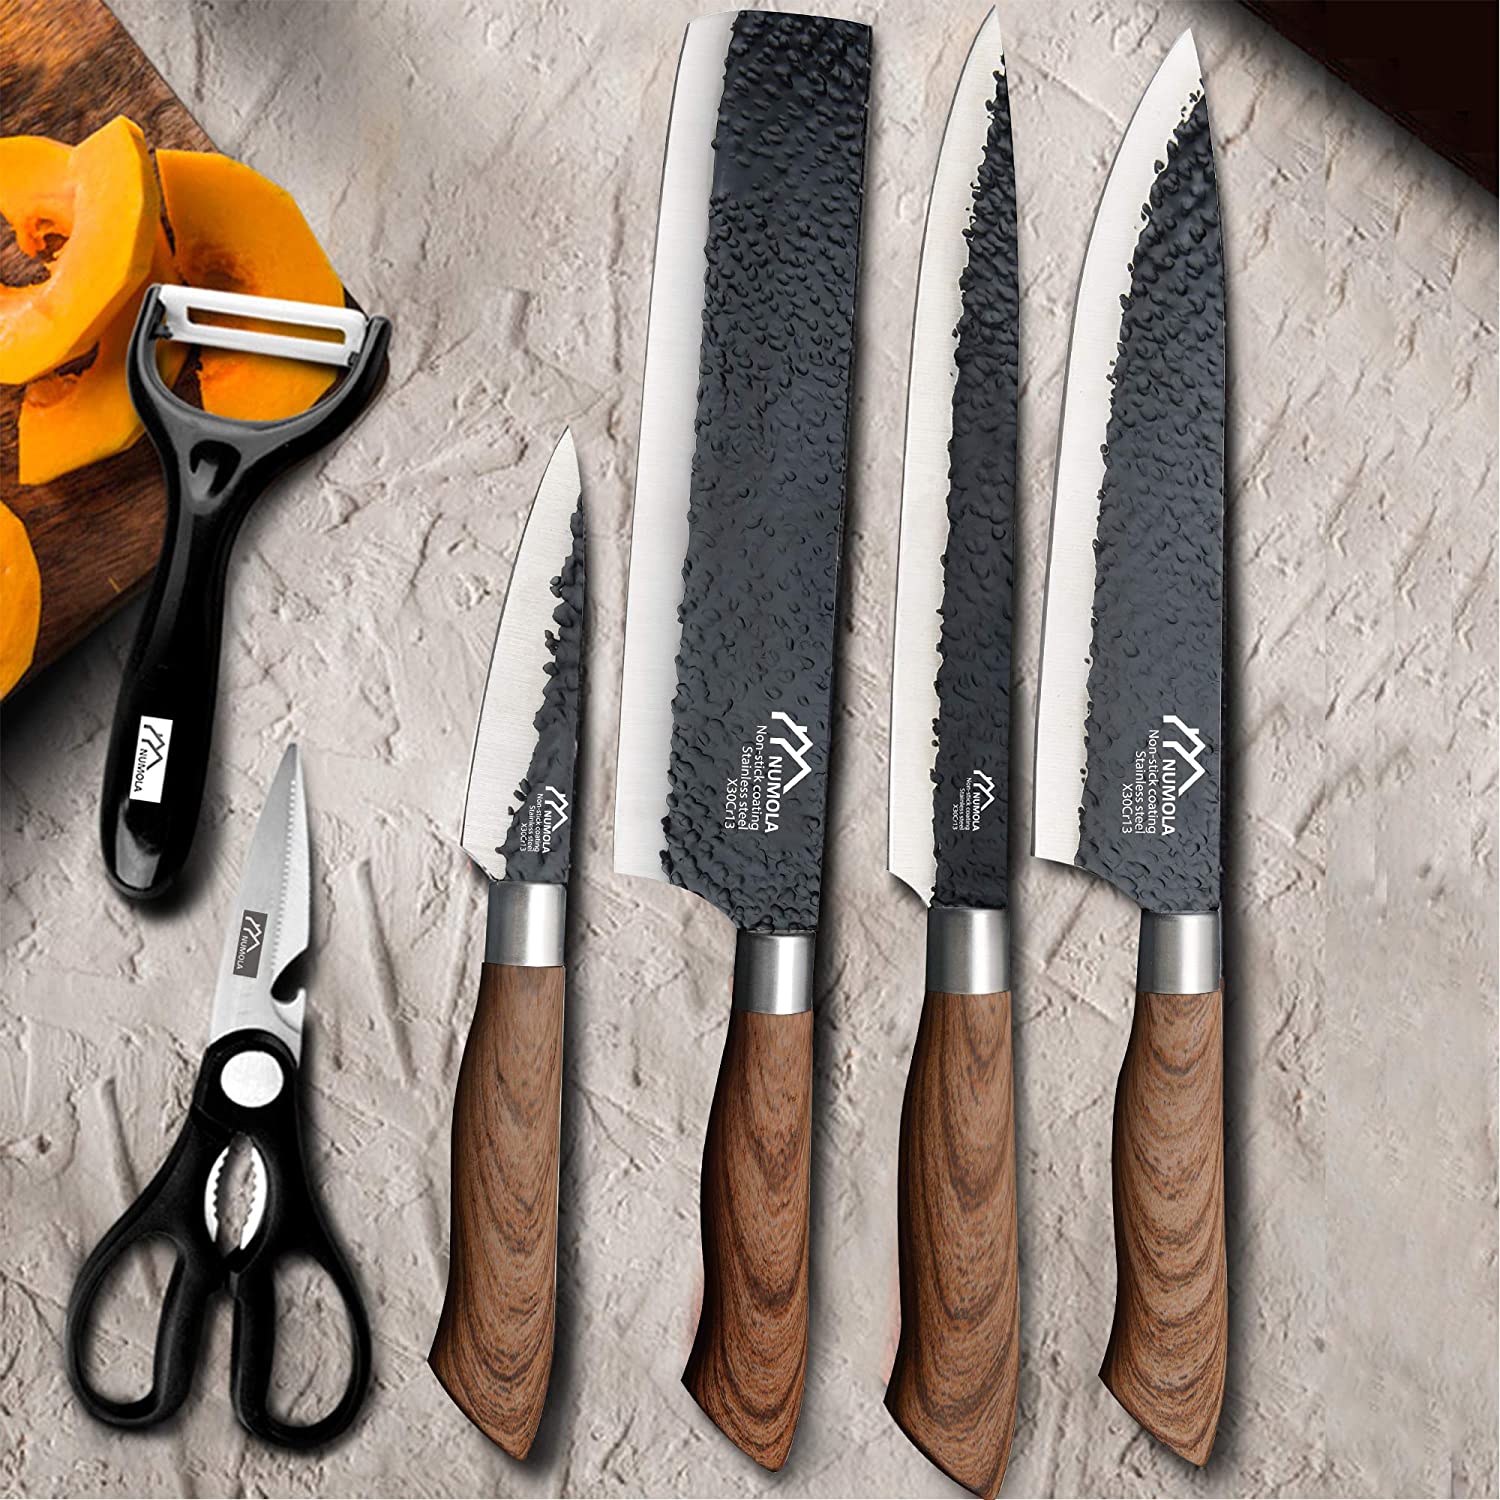 6PCS/Sets Colorful Kitchen Knives Set Stainless Steel Kitchen Knife Set  Without Block Cute Fruit Knife Set Kitchen Supplies Tool